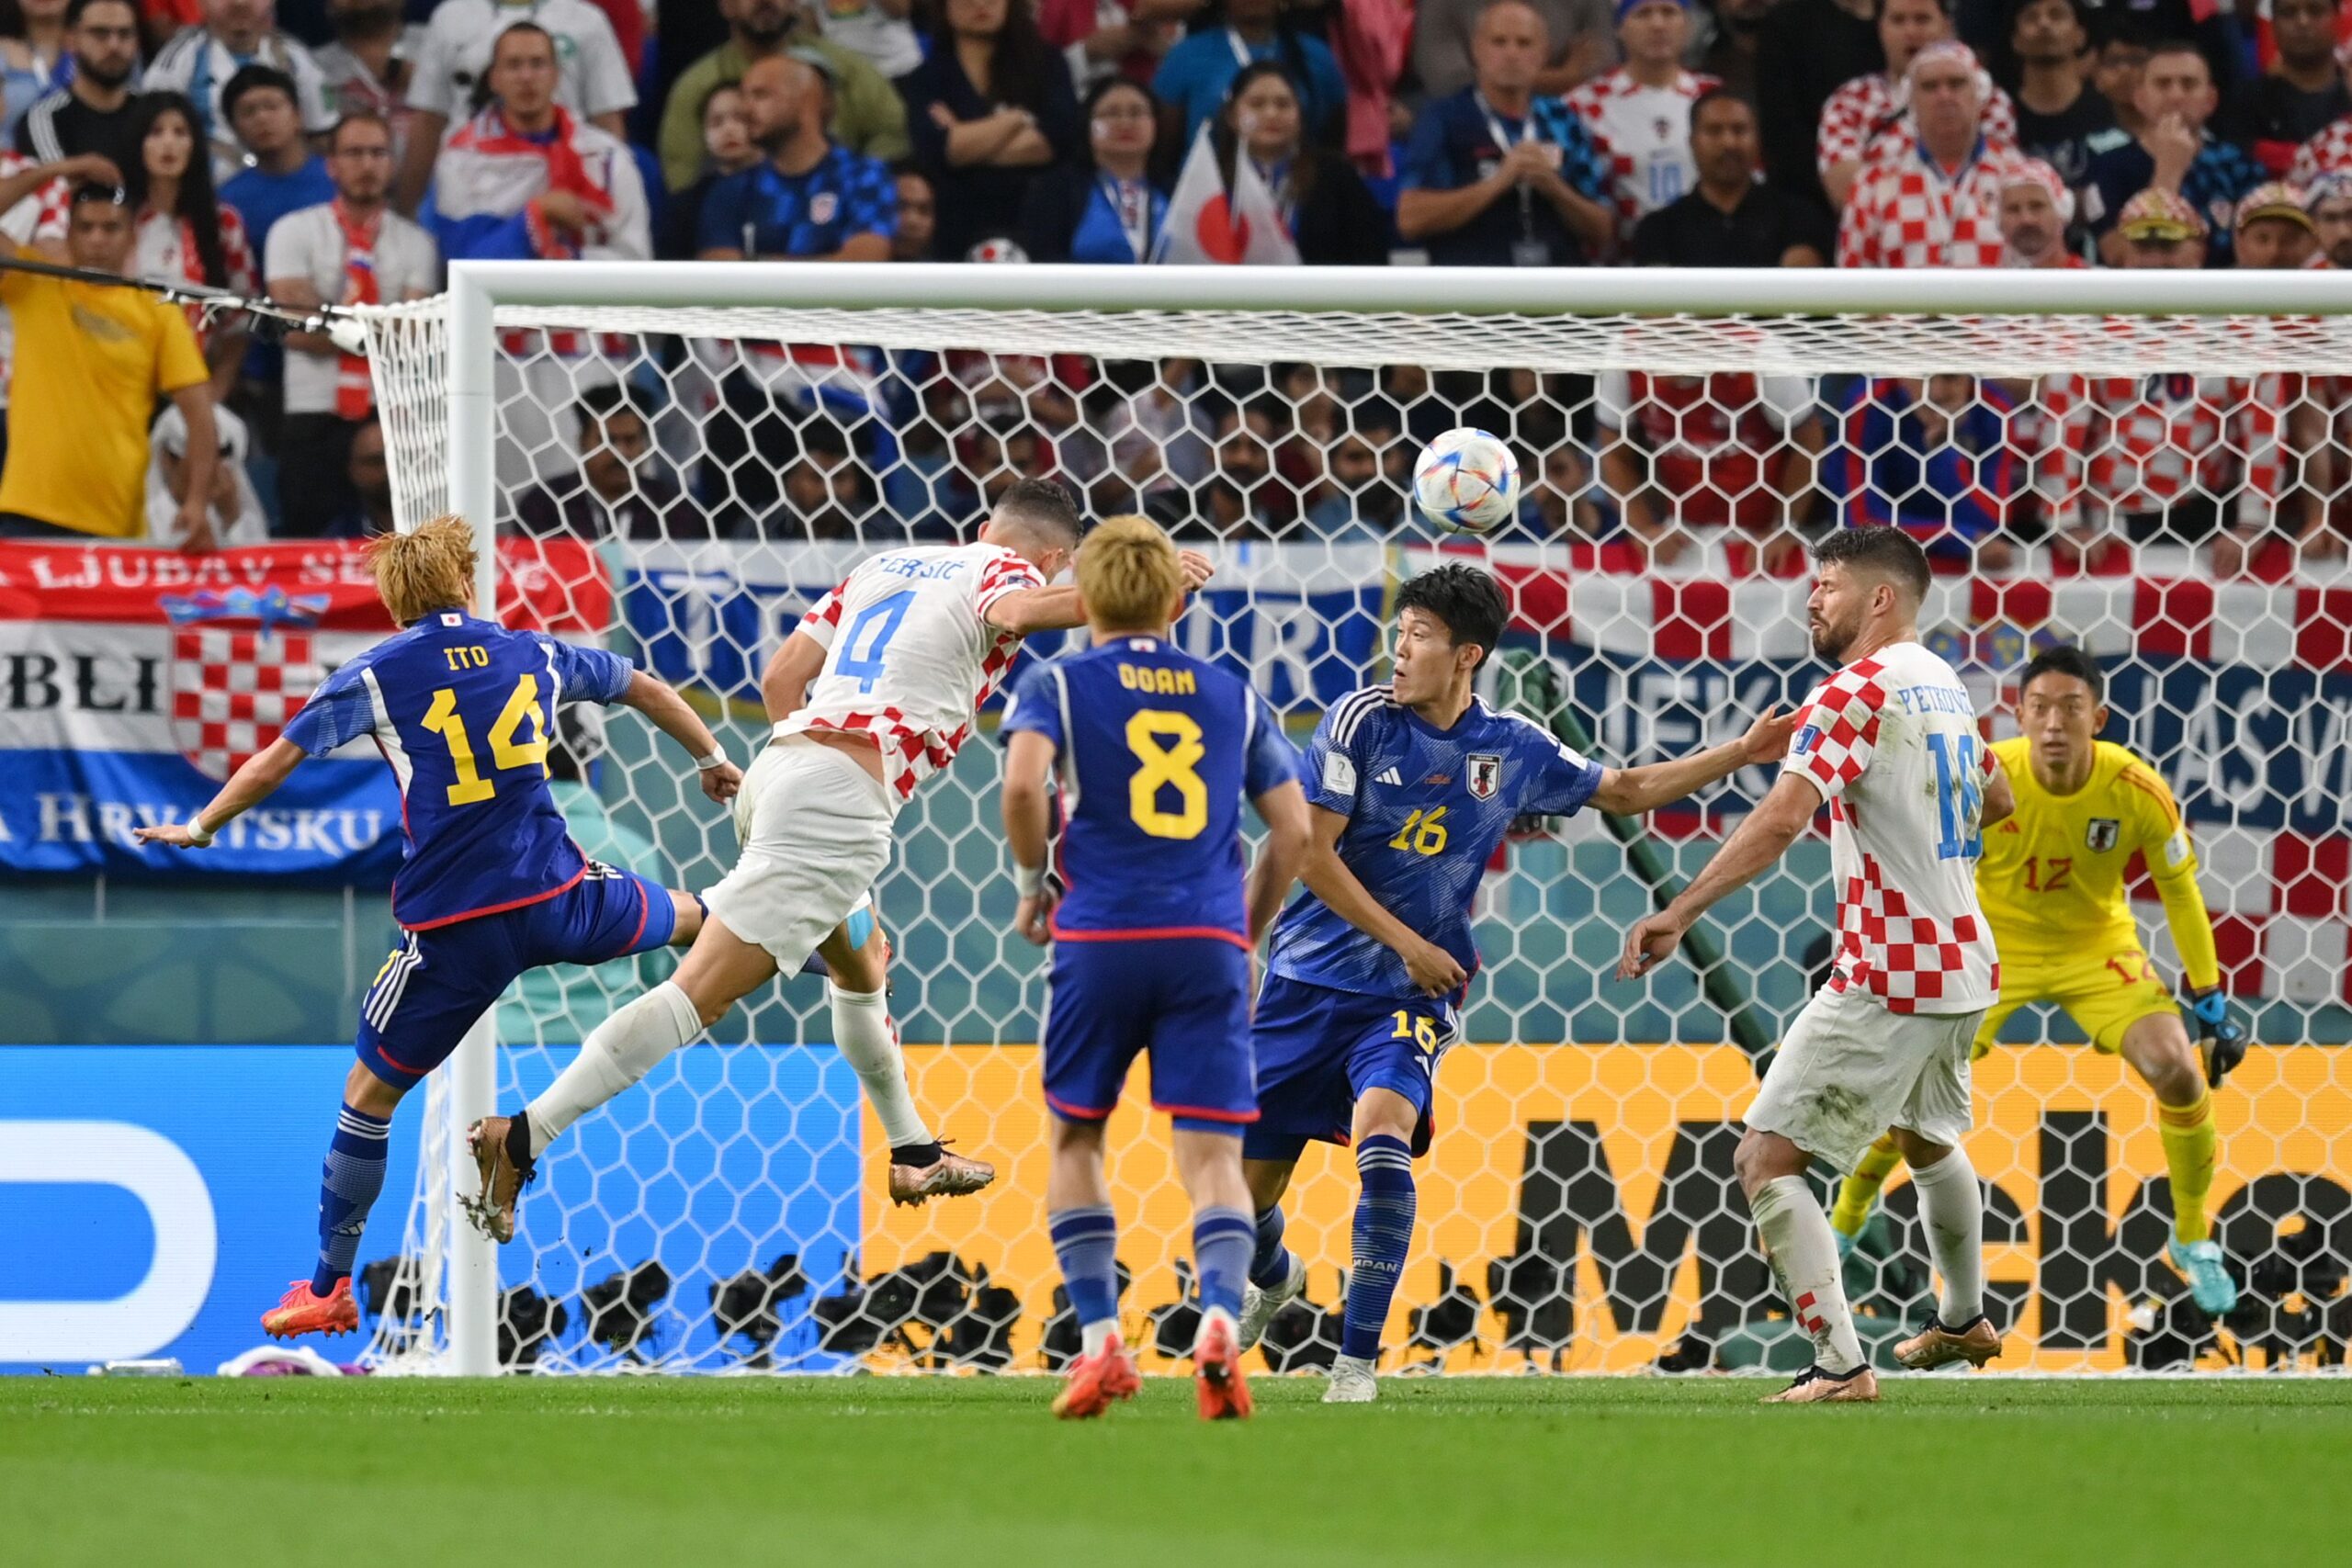 The first shootout of this World Cup edition promoted Croatia, who overcame Japan thanks to their goalkeeper Dominik Livakovic's saves